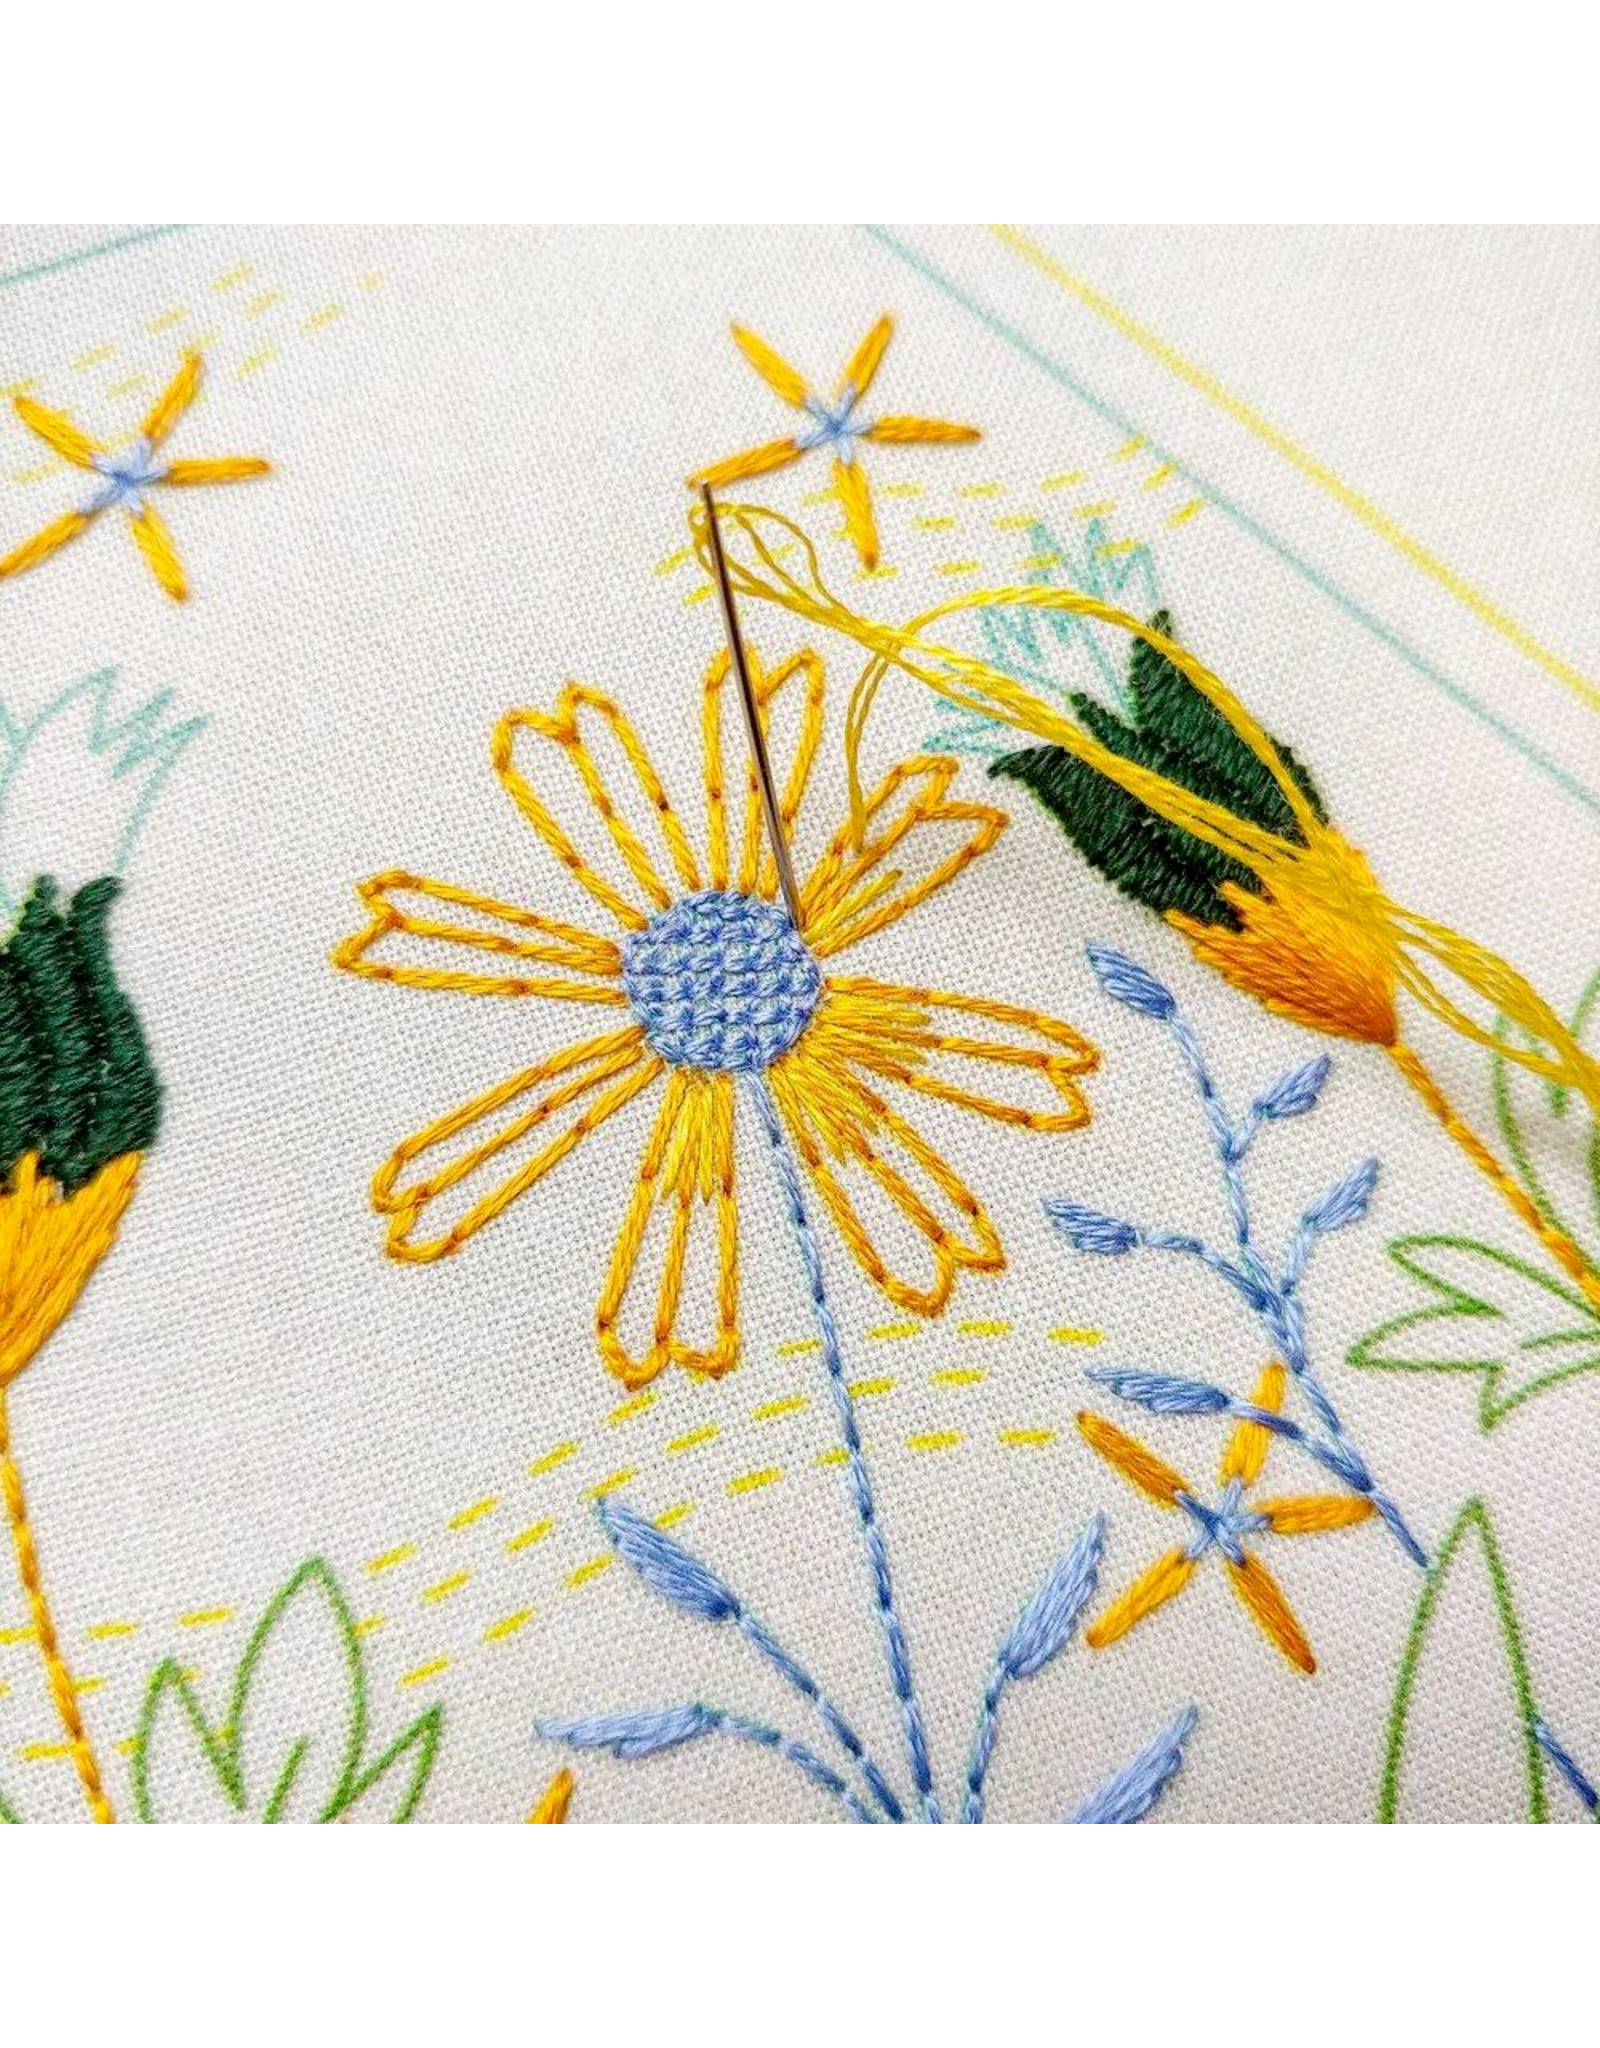 cozyblue Summer Breeze Embroidery Kit from cozyblue